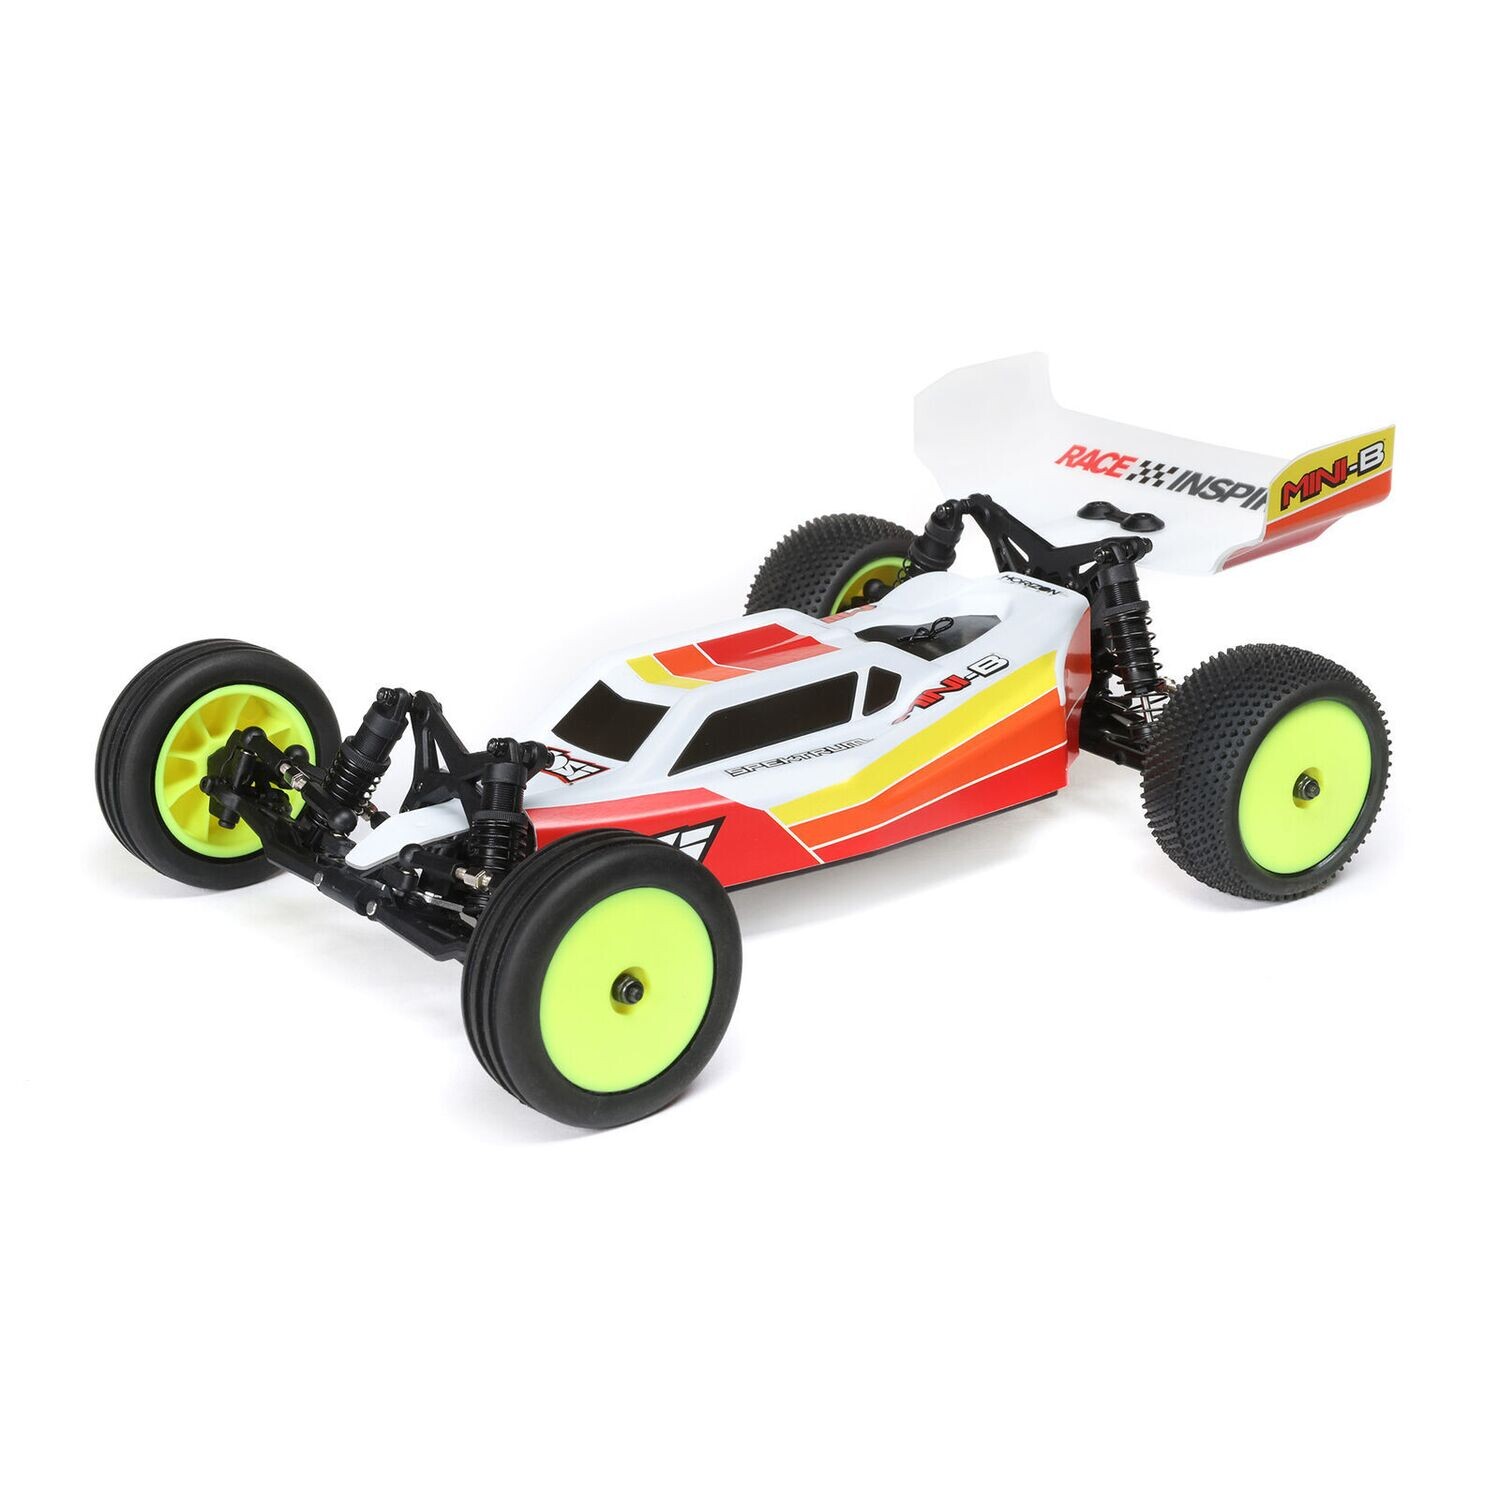 1/16 Mini-B 2WD Buggy Brushless RTD, Red